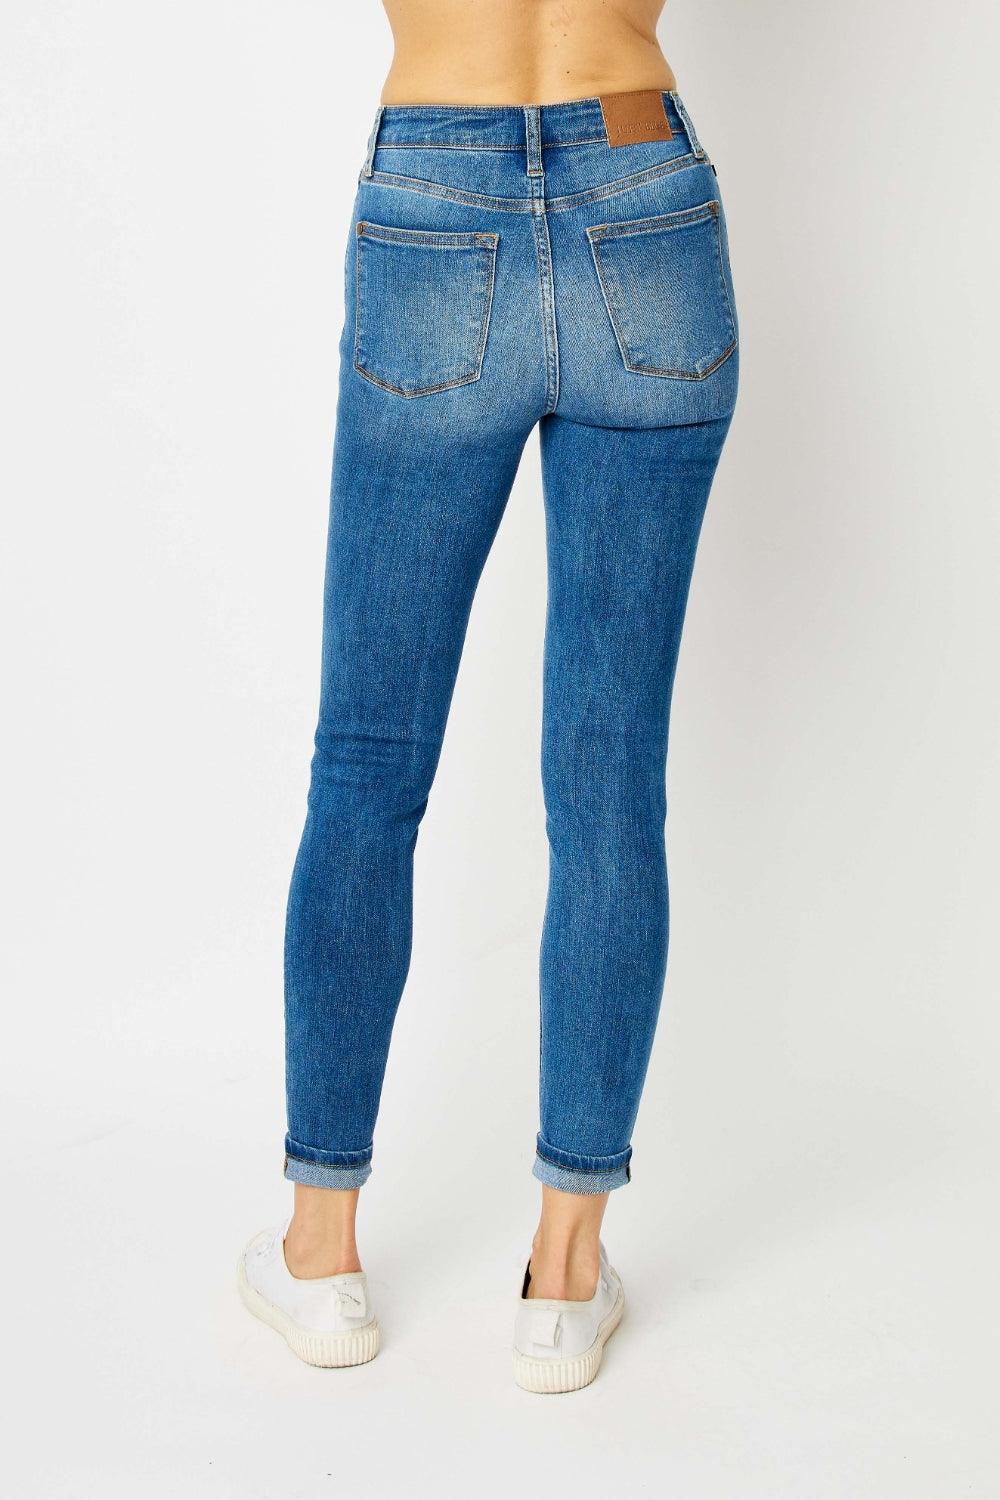 Judy Blue Full Size Cuffed Hem Skinny Jeans - God's Girl Gifts And Apparel